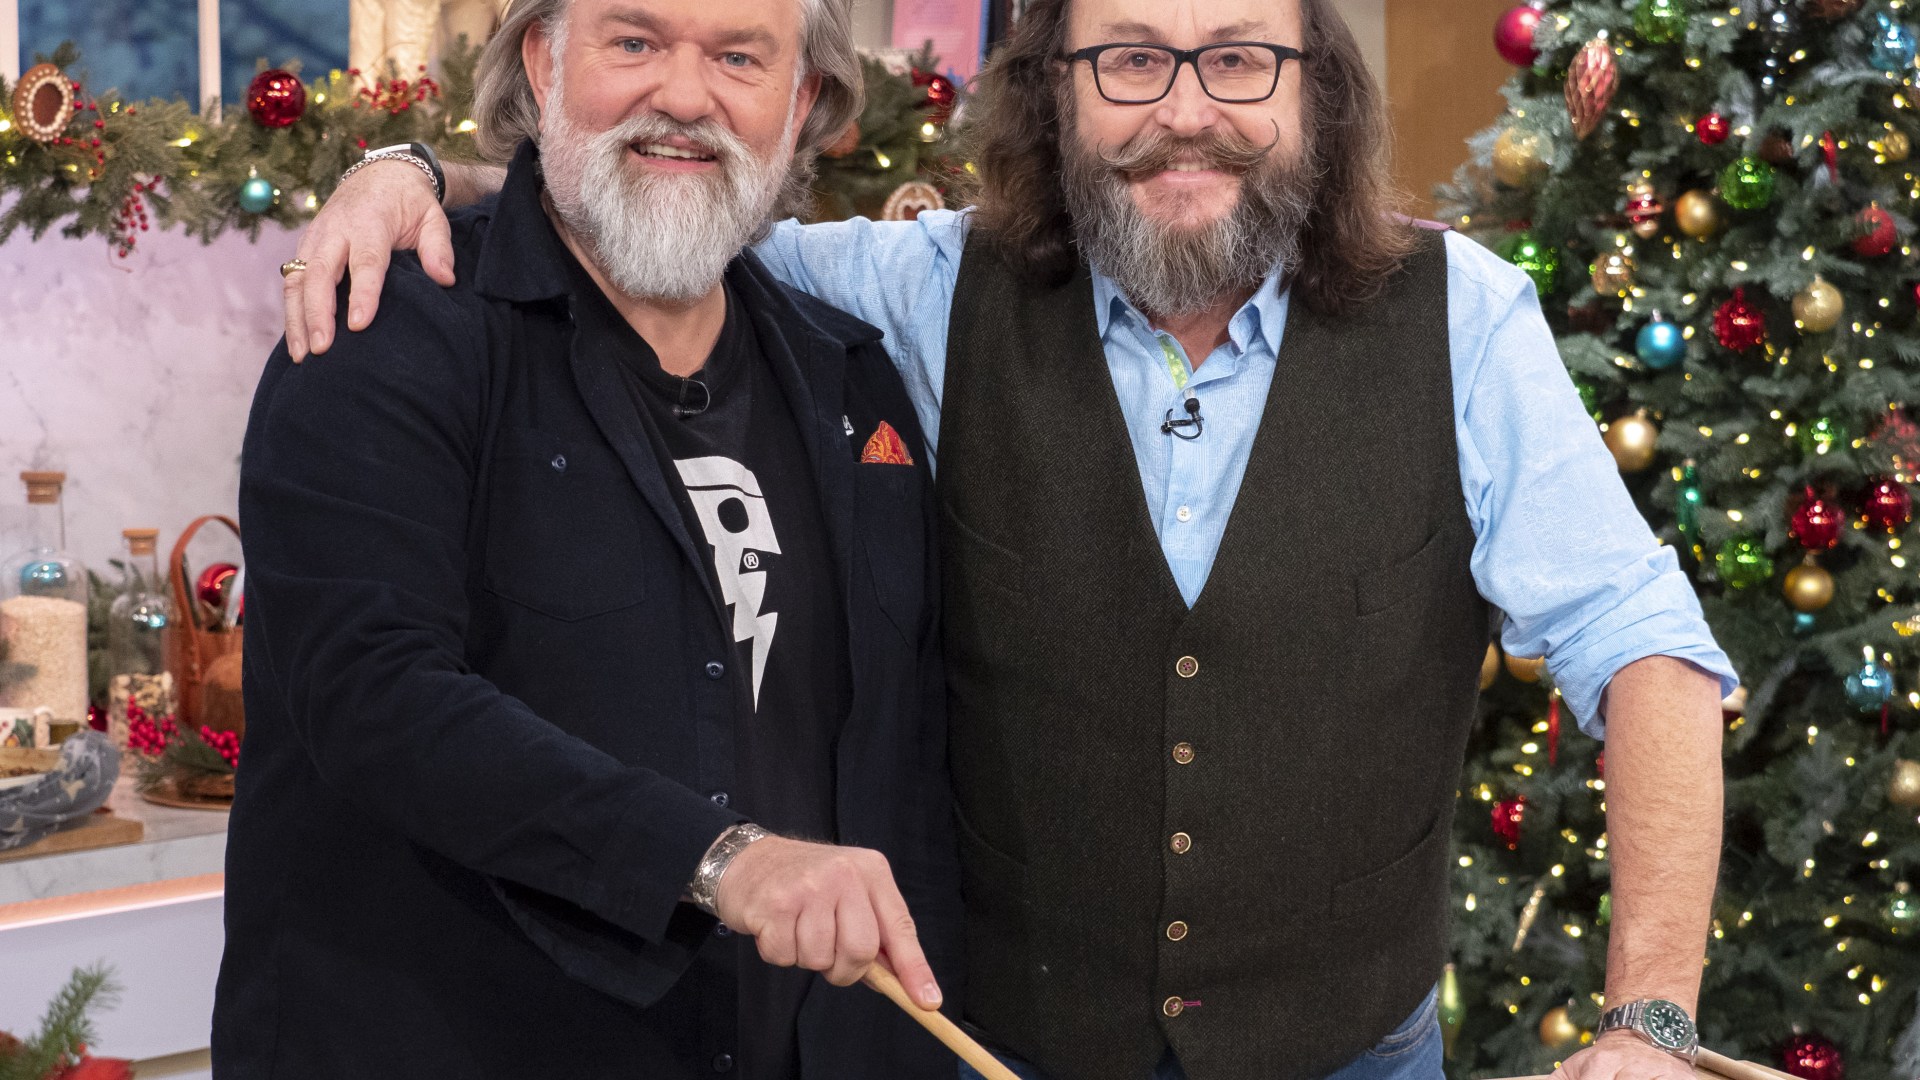 Hairy Bikers’ Si King thanks fans for support as he celebrates bittersweet milestone without late Dave Myers [Video]